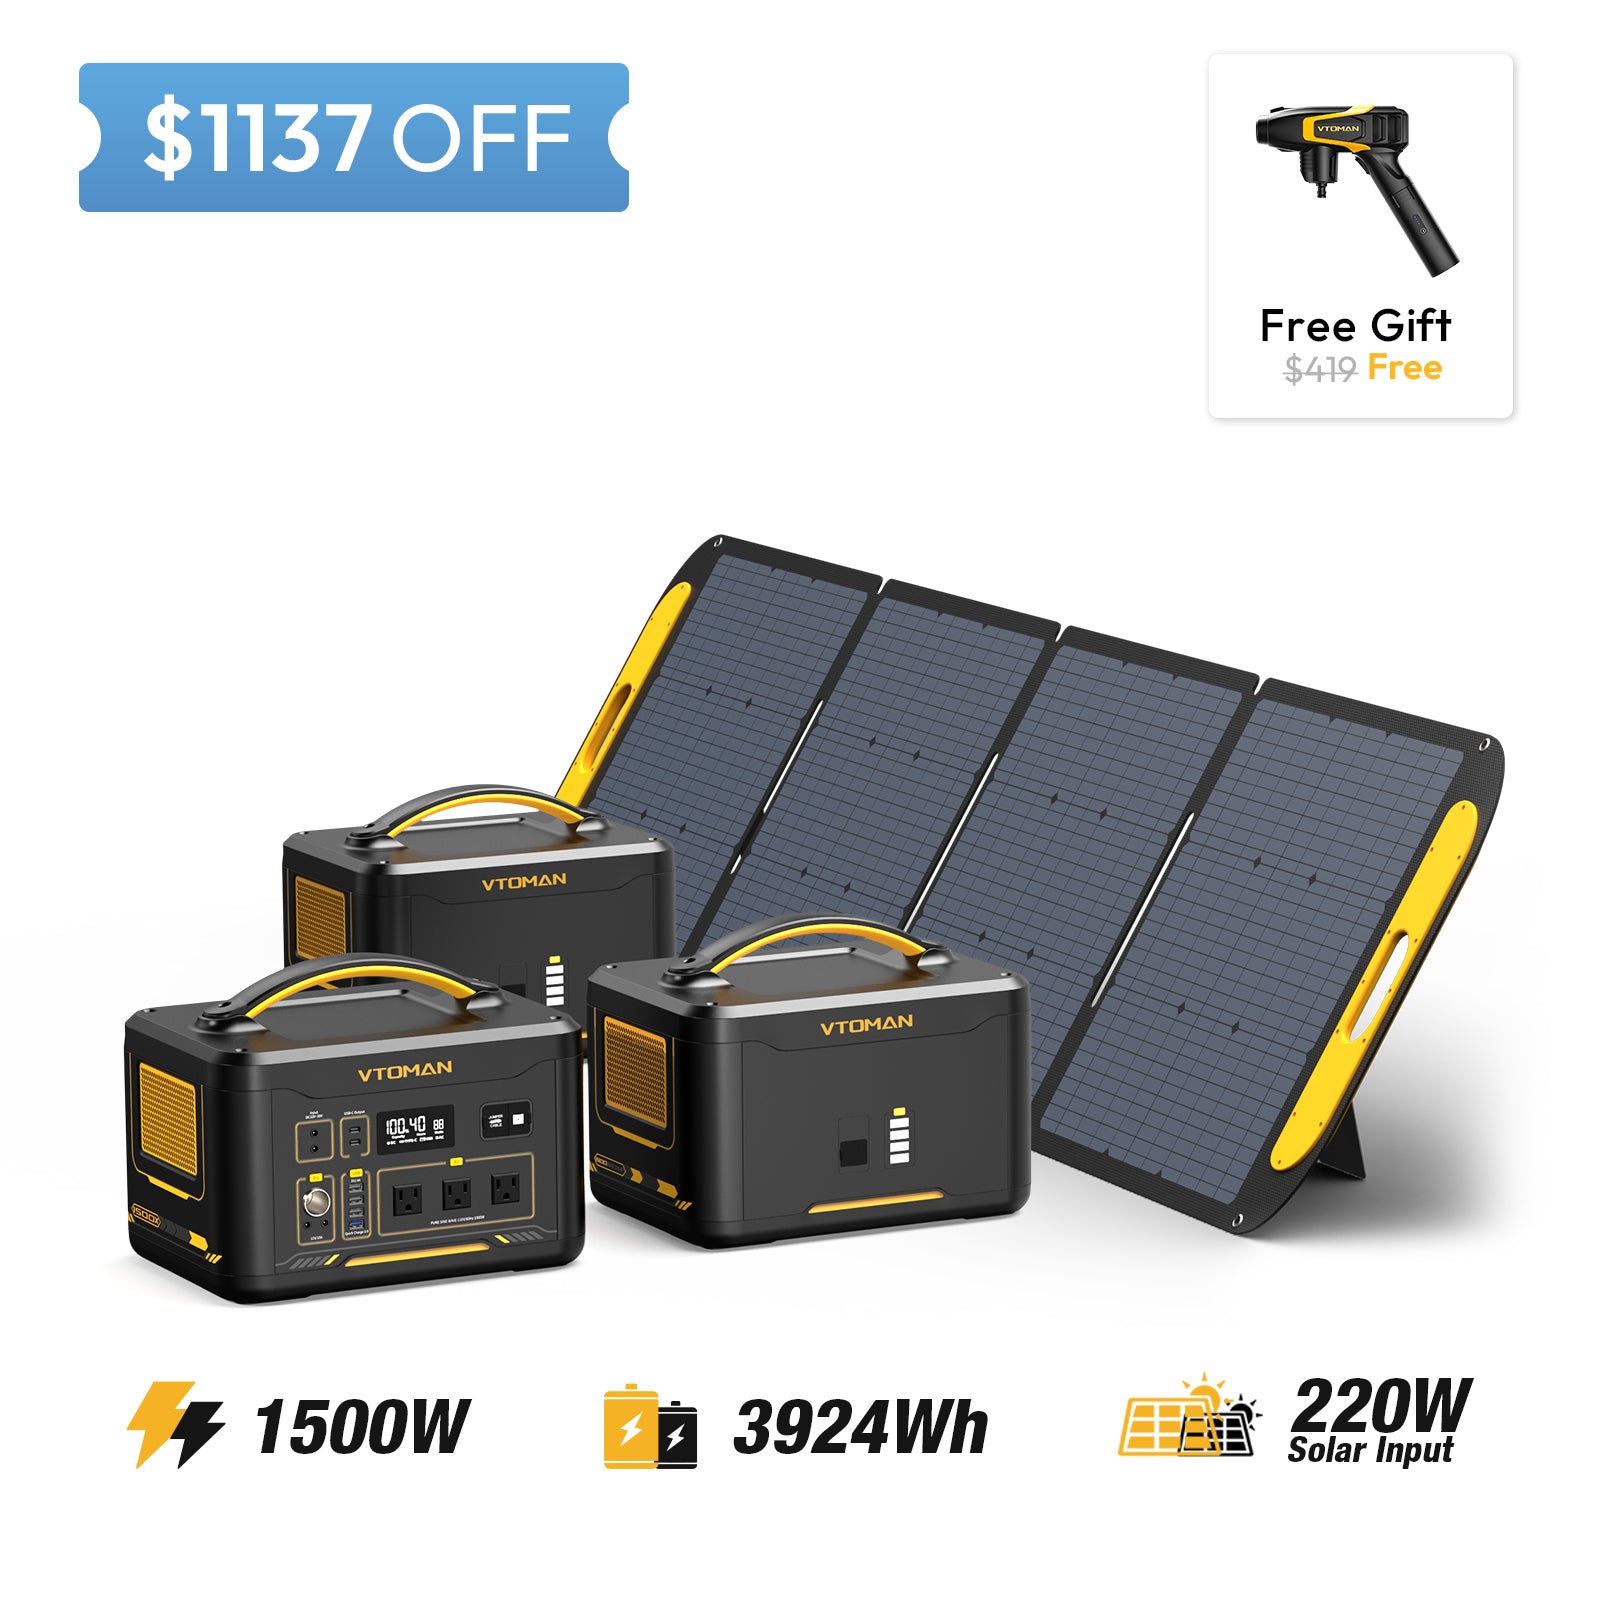 Jump 1500X and 2-1548wh extra battery and 220w solar panel save $1137 in summer sale